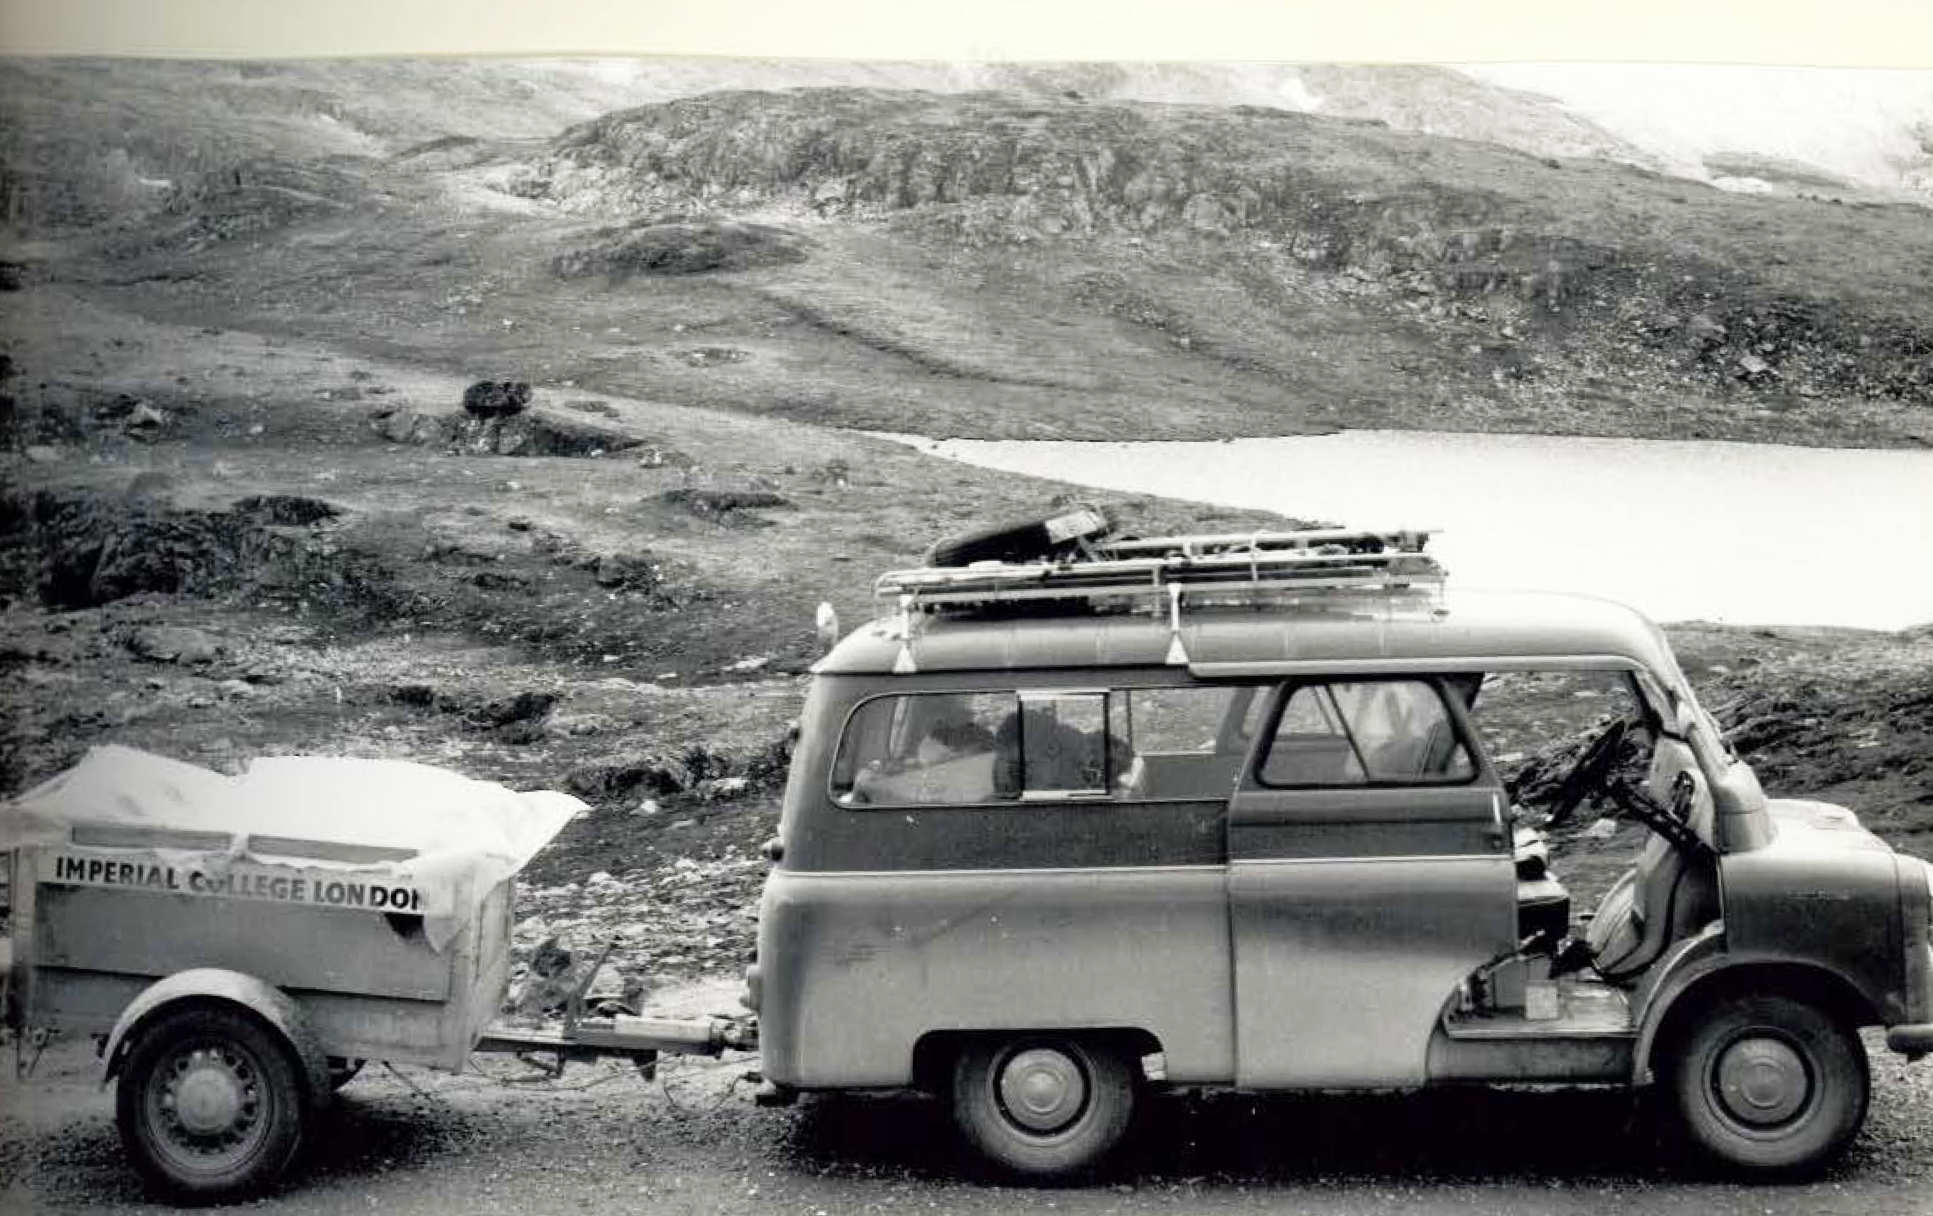 Expedition van and trailer